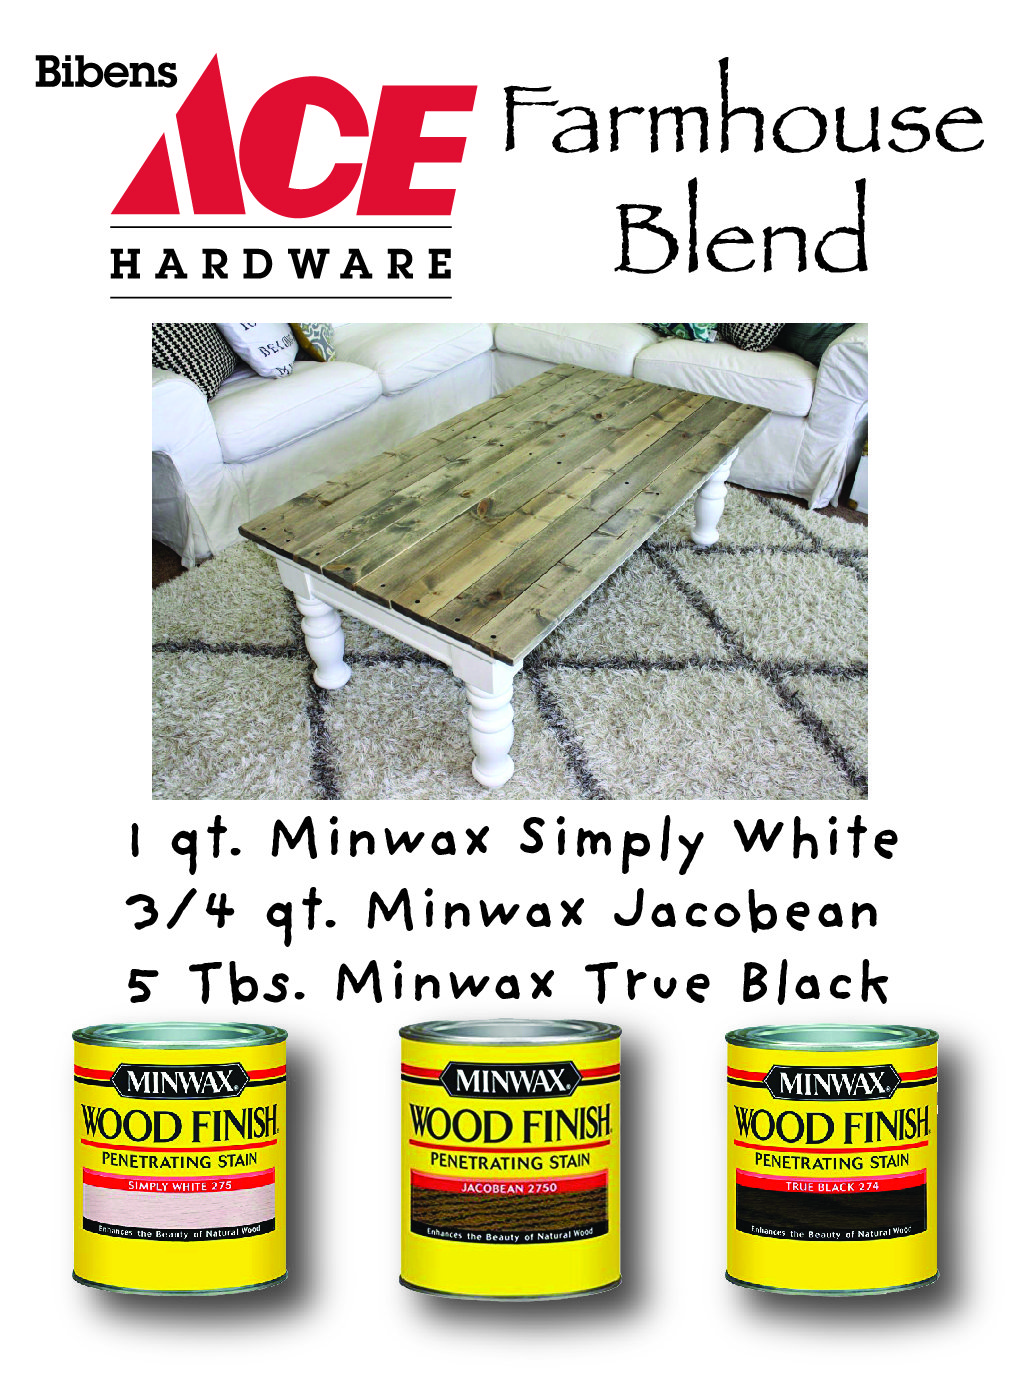 Bibens Ace Farmhouse Blend recipe card with Minwax products